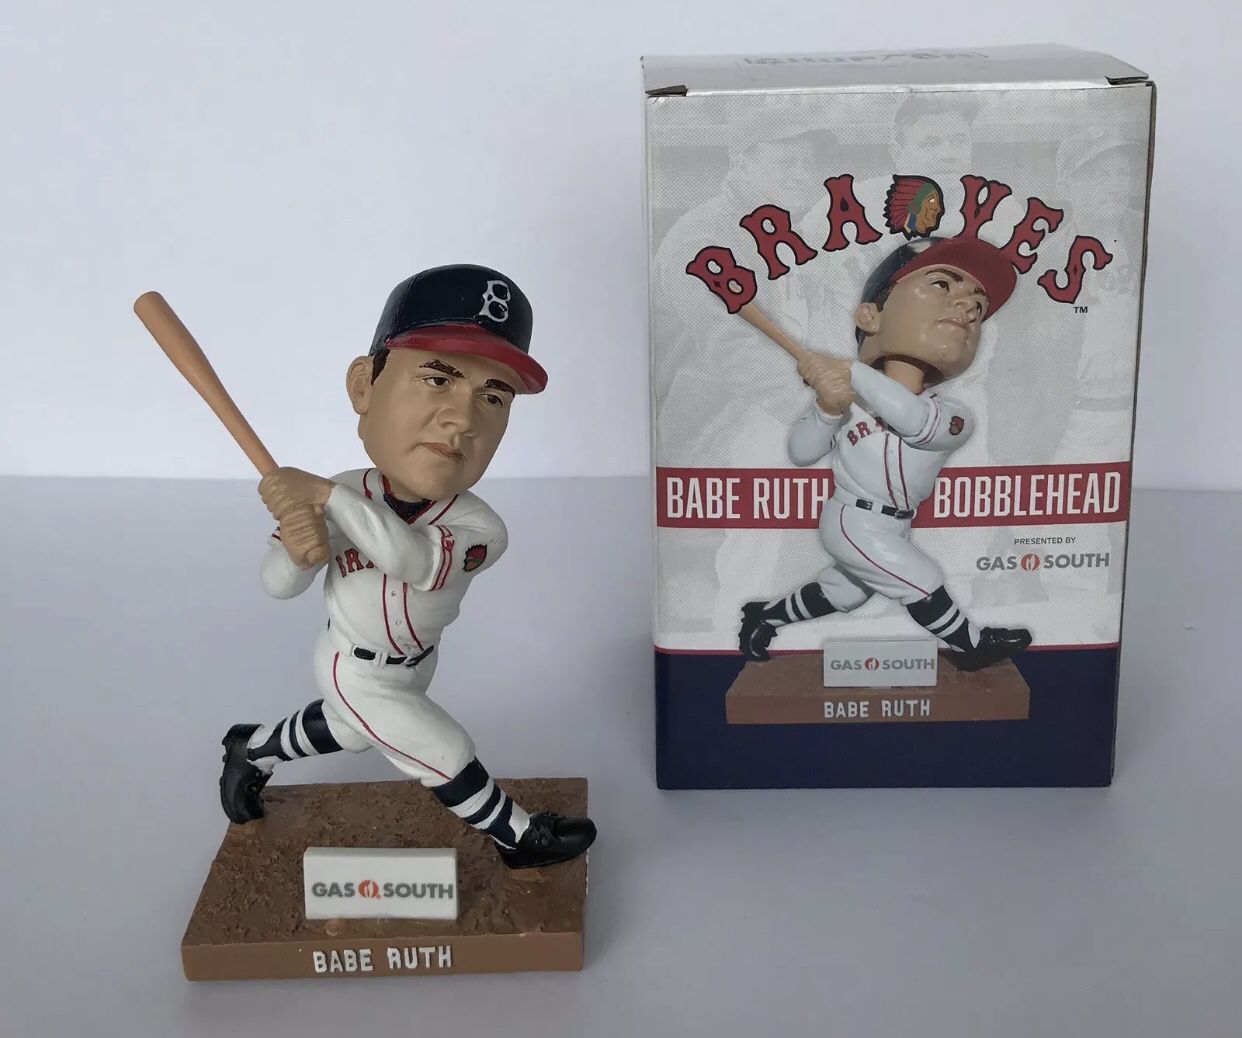 Babe Ruth Boston Braves bobble head for Sale in Gaffney, SC - OfferUp